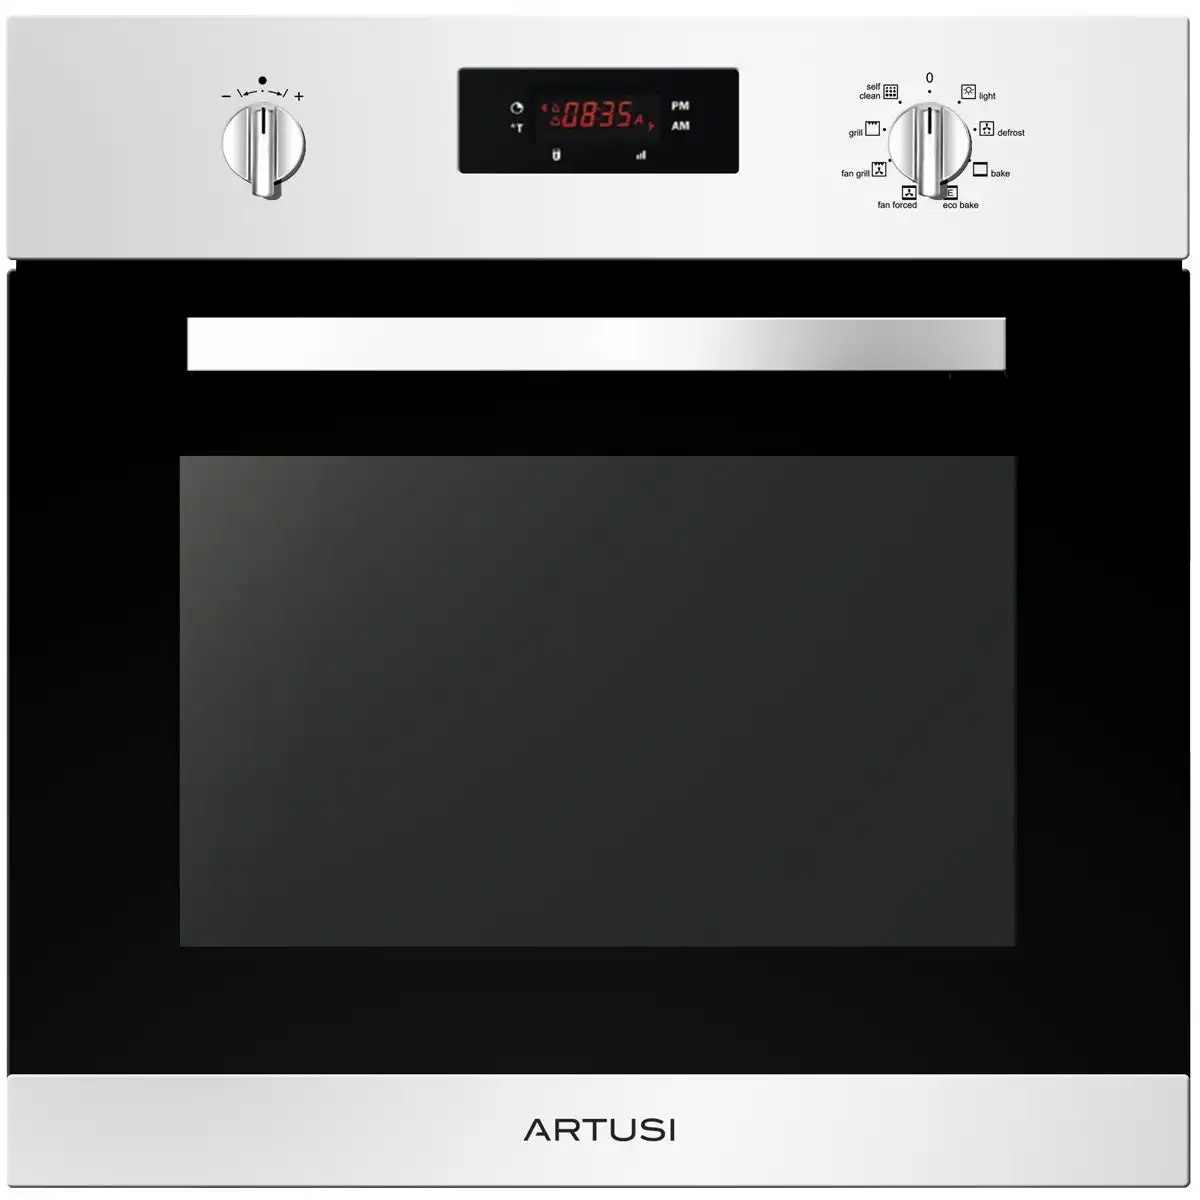 Artusi 60cm Maximus Series Pyrolytic Electric Built-In Oven i